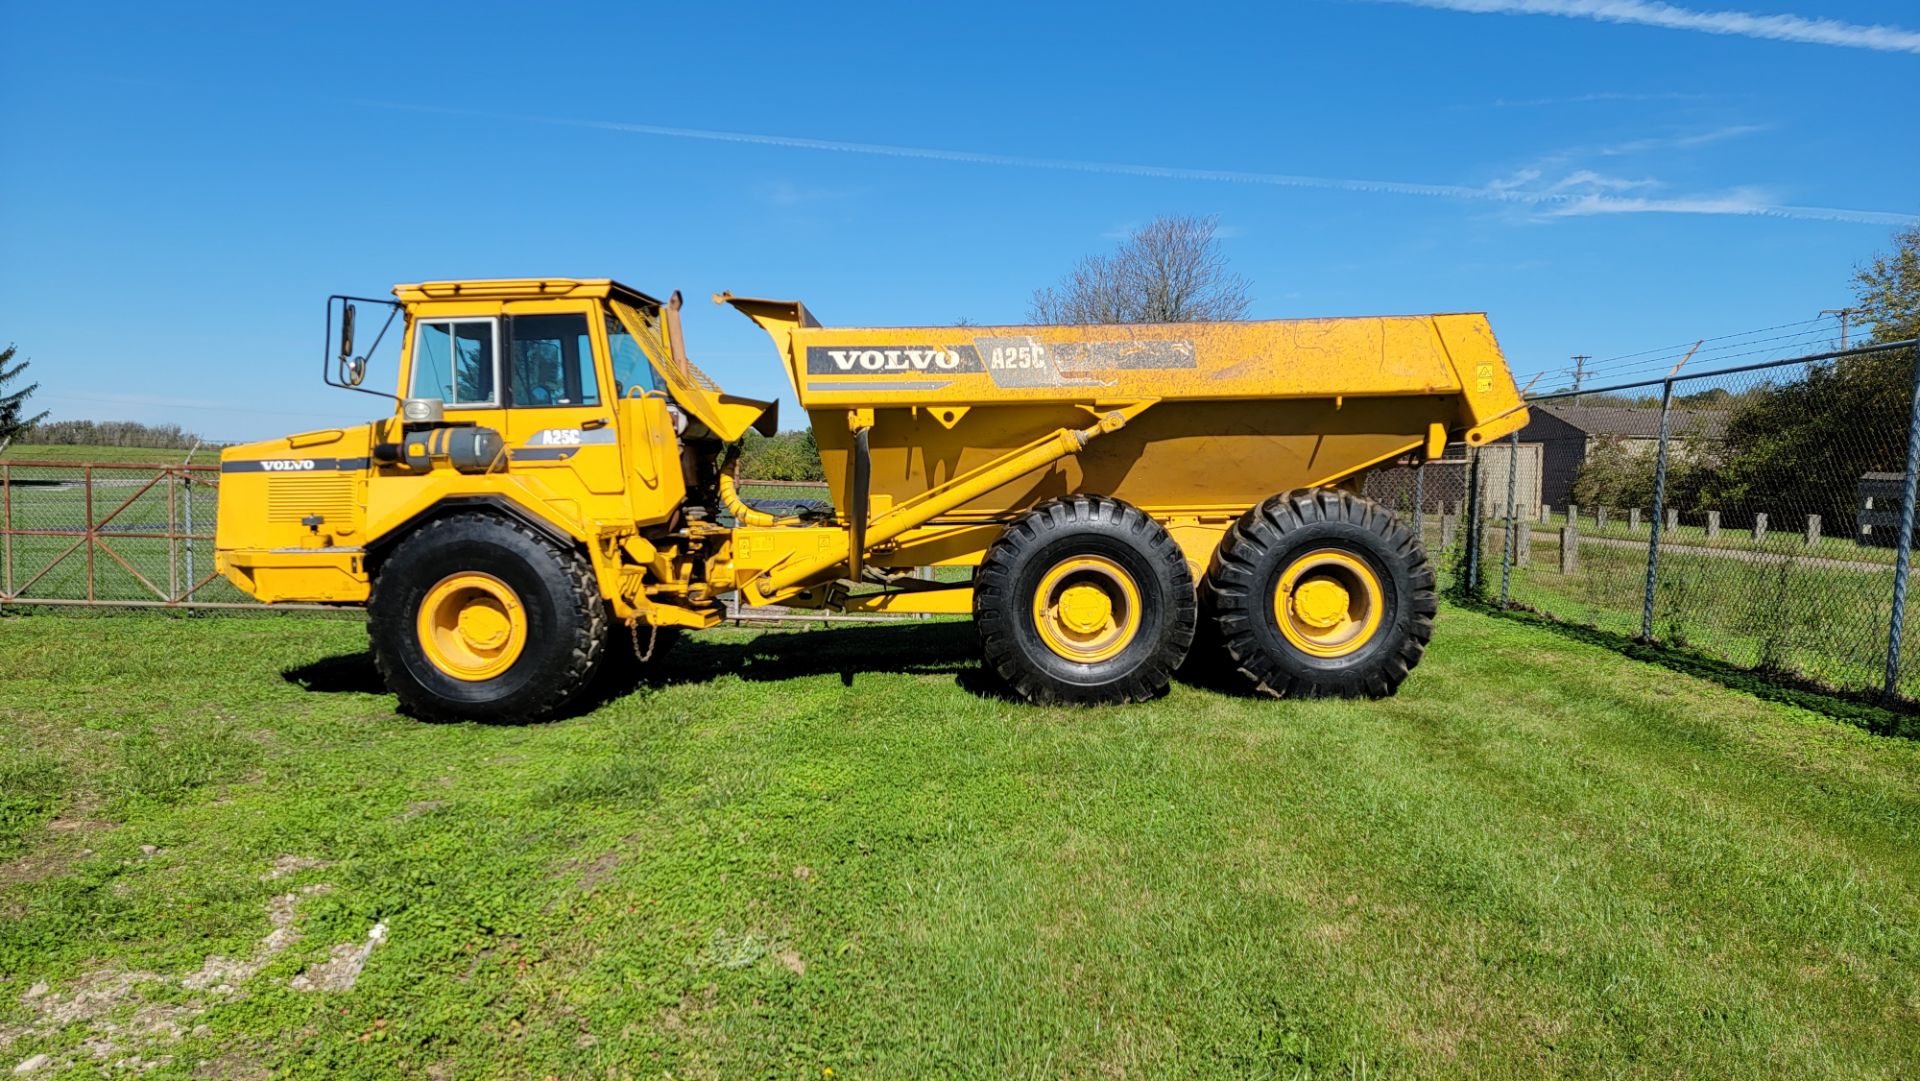 Volvo A25C 6x6 Offroad Dump Truck, 30,519 Miles, 12,411 Hours, s/n 5350V61011 - Image 3 of 34